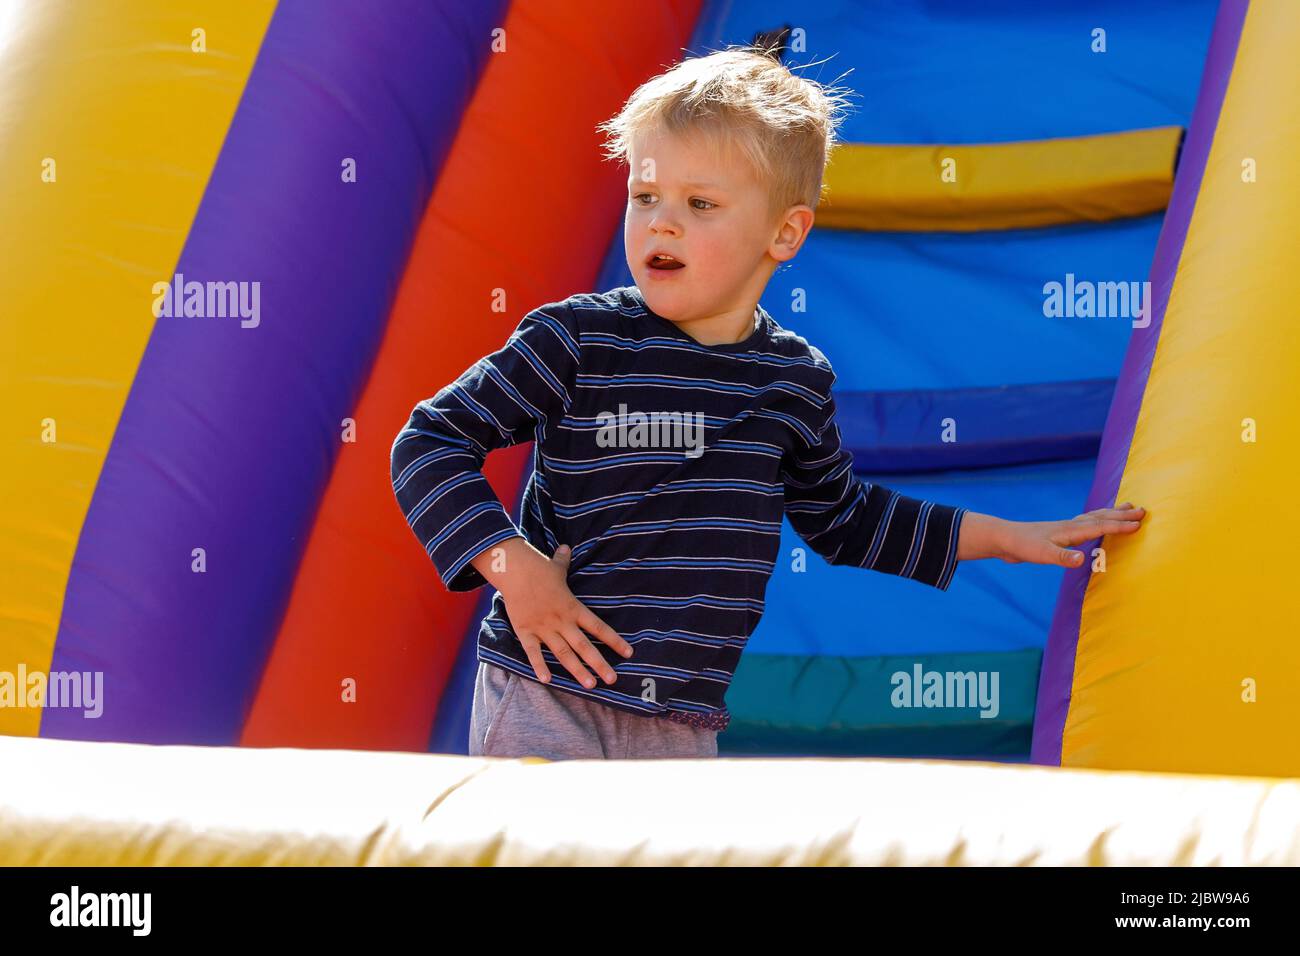 Child jumping on colorful playground trampoline. Kid jump in inflatable bounce castle on kindergarten birthday party. Activity and play center for you Stock Photo